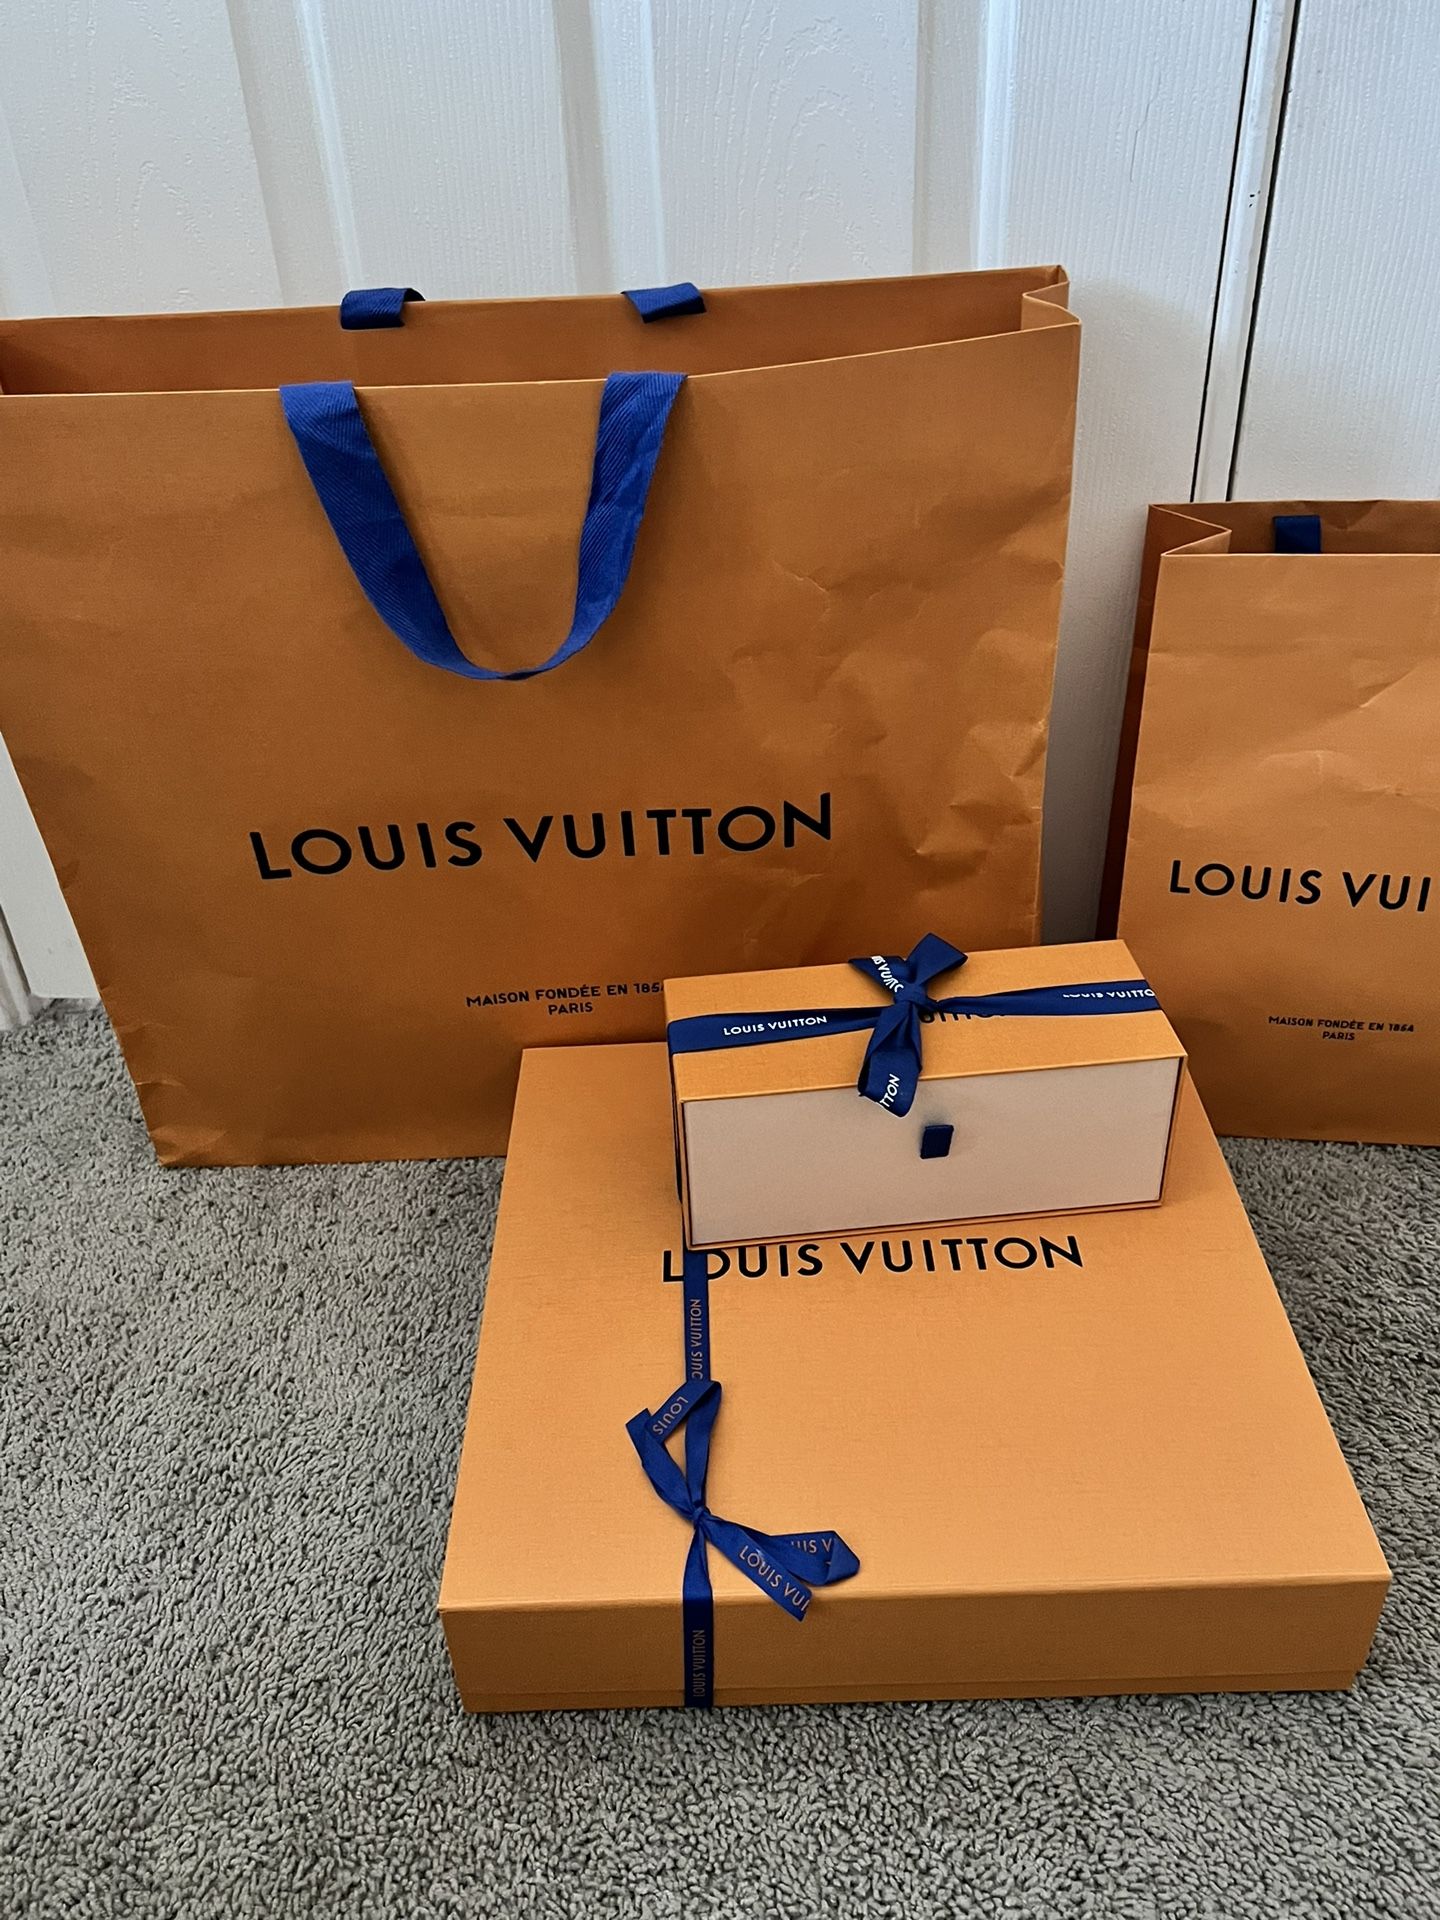 LOUIS VUITTON BOX W/BAG PAPER & CARD for Sale in North Bend, WA - OfferUp